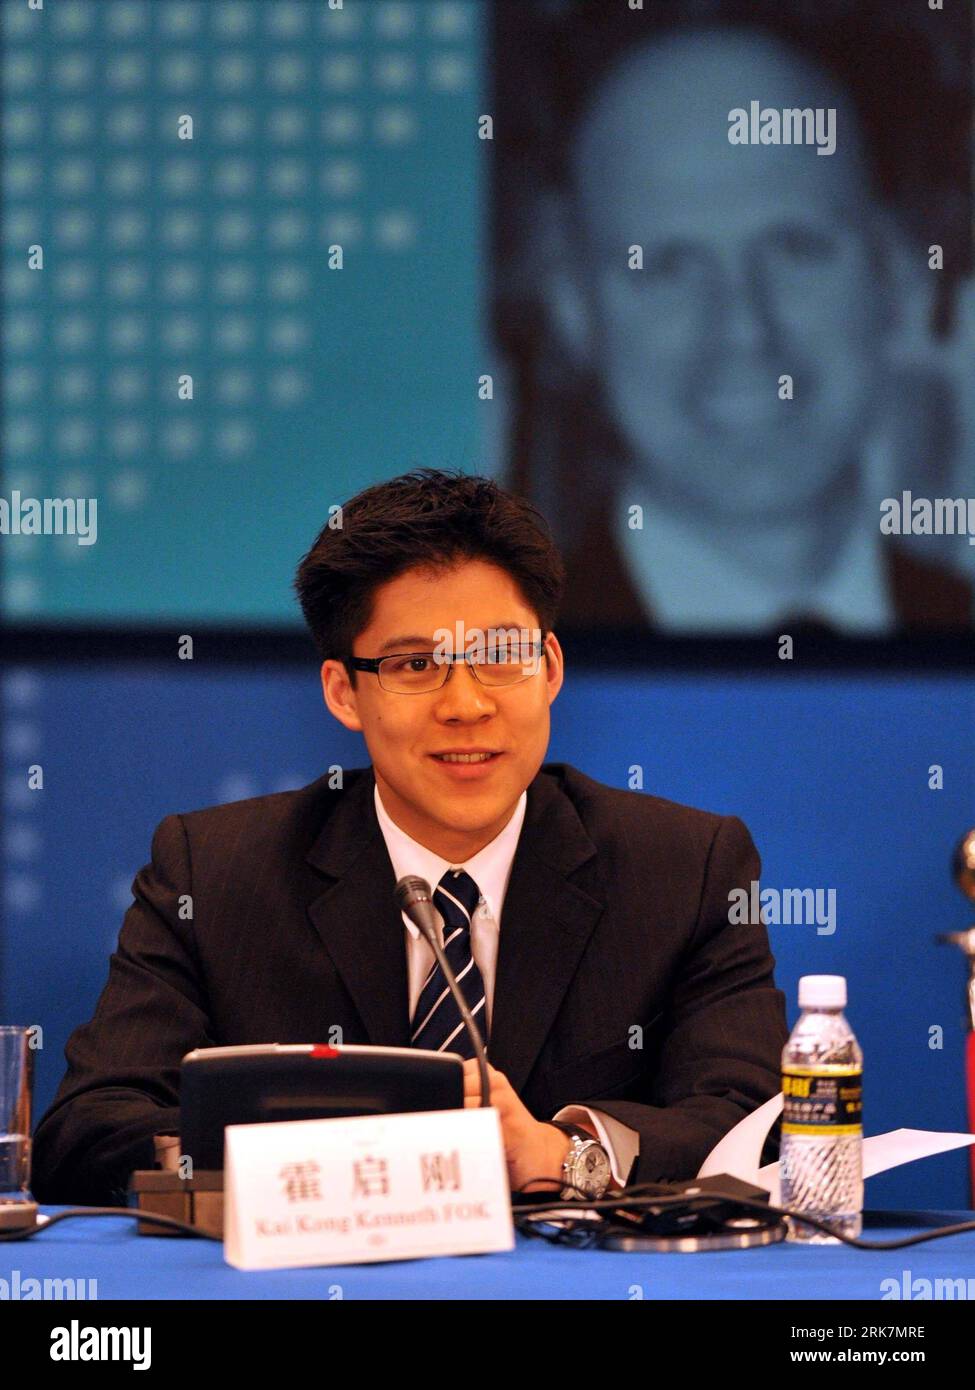 Bildnummer: 53928492  Datum: 09.04.2010  Copyright: imago/Xinhua (100409) -- BOAO, April 9, 2010 (Xinhua) -- Kai Kong Kenneth FOK, Assistant to Governor Fok Ying Tung Foundation Ltd, attends the Young Leaders Roundtable during the Boao Forum for Asia (BFA) Annual Conference 2010 in Boao, south China s Hainan Province, April 9, 2010. Young Leaders Roundtable was held here on Friday. (Xinhua/Jiang Enyu) (jl) (3)CHINA-BOAO-BFA-YOUNG LEADERS ROUNDTABLE(CN) PUBLICATIONxNOTxINxCHN Politik People Porträt kbdig xng 2010 hoch     Bildnummer 53928492 Date 09 04 2010 Copyright Imago XINHUA  Boao April 9 Stock Photo